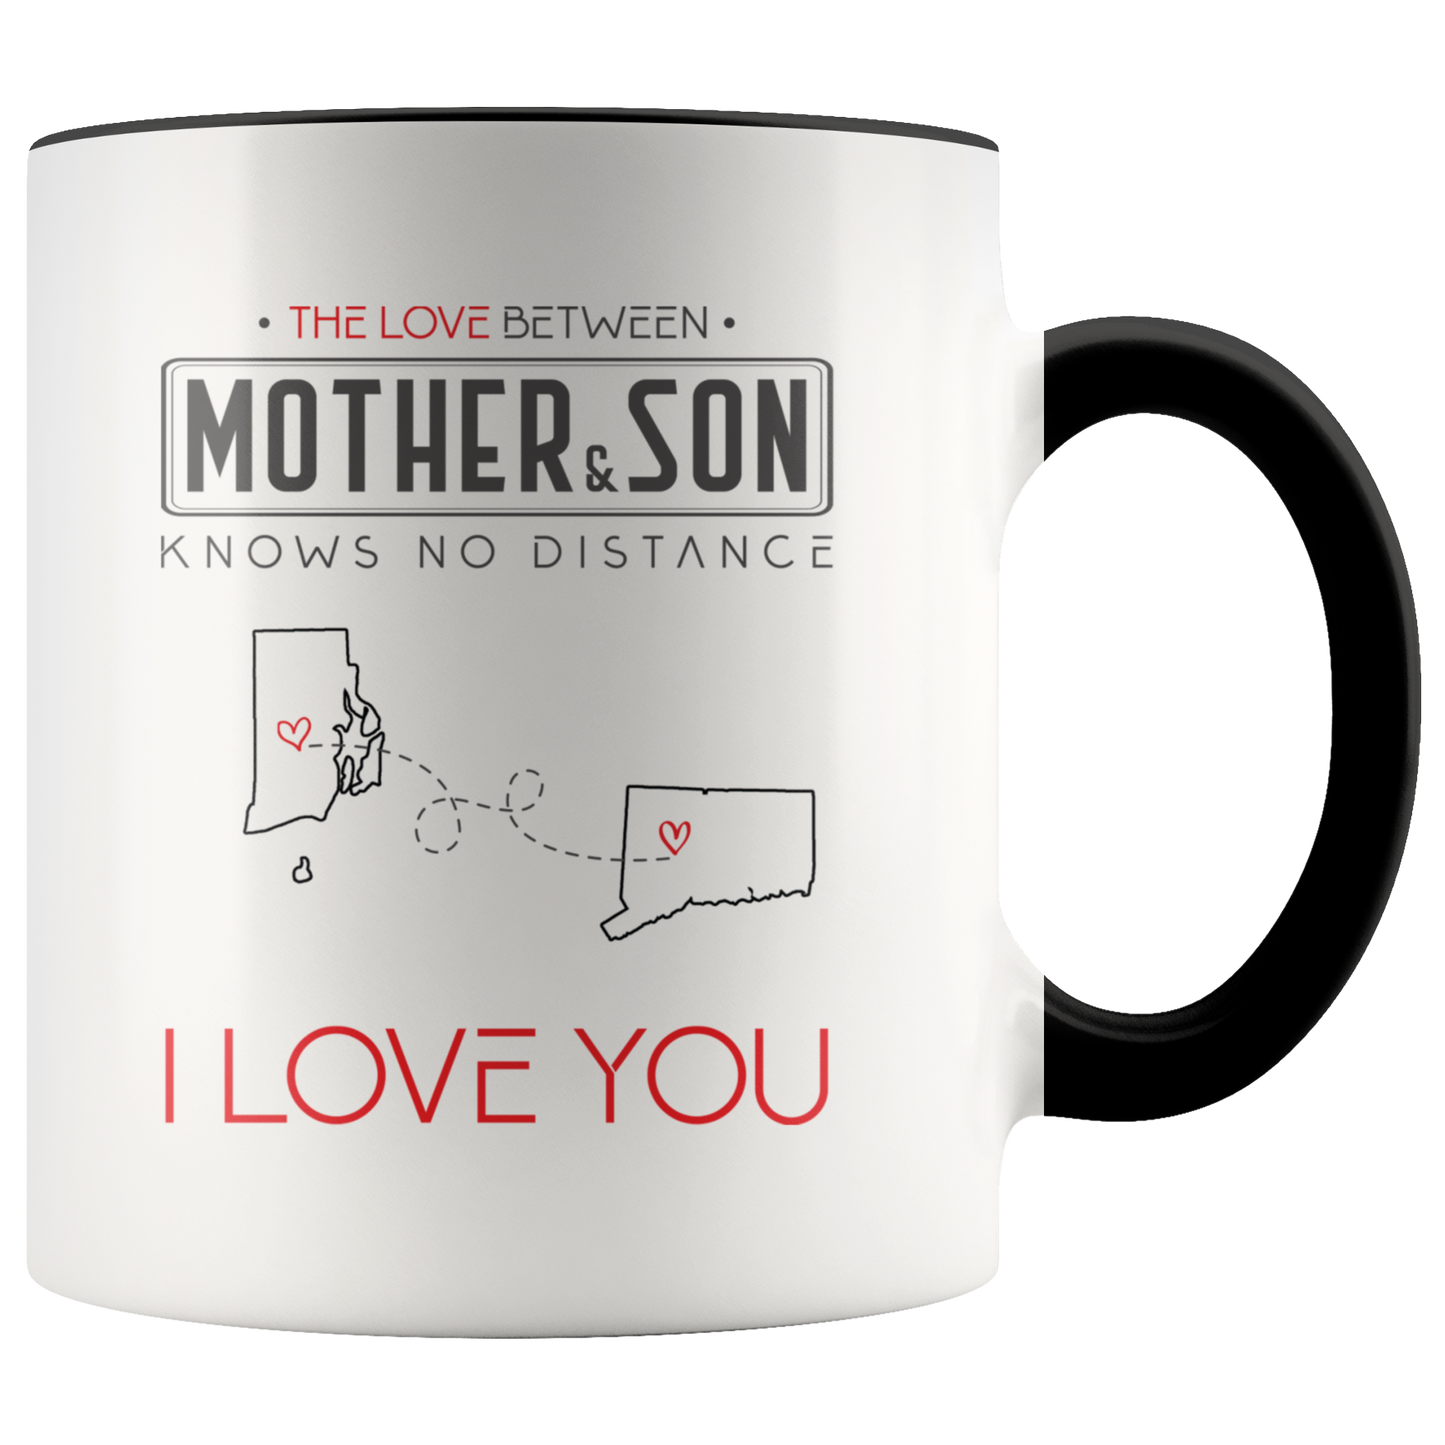 ND-21316602-sp-23094 - Mom And Son Accent Mug 11 oz Red - The Love Between Mother A